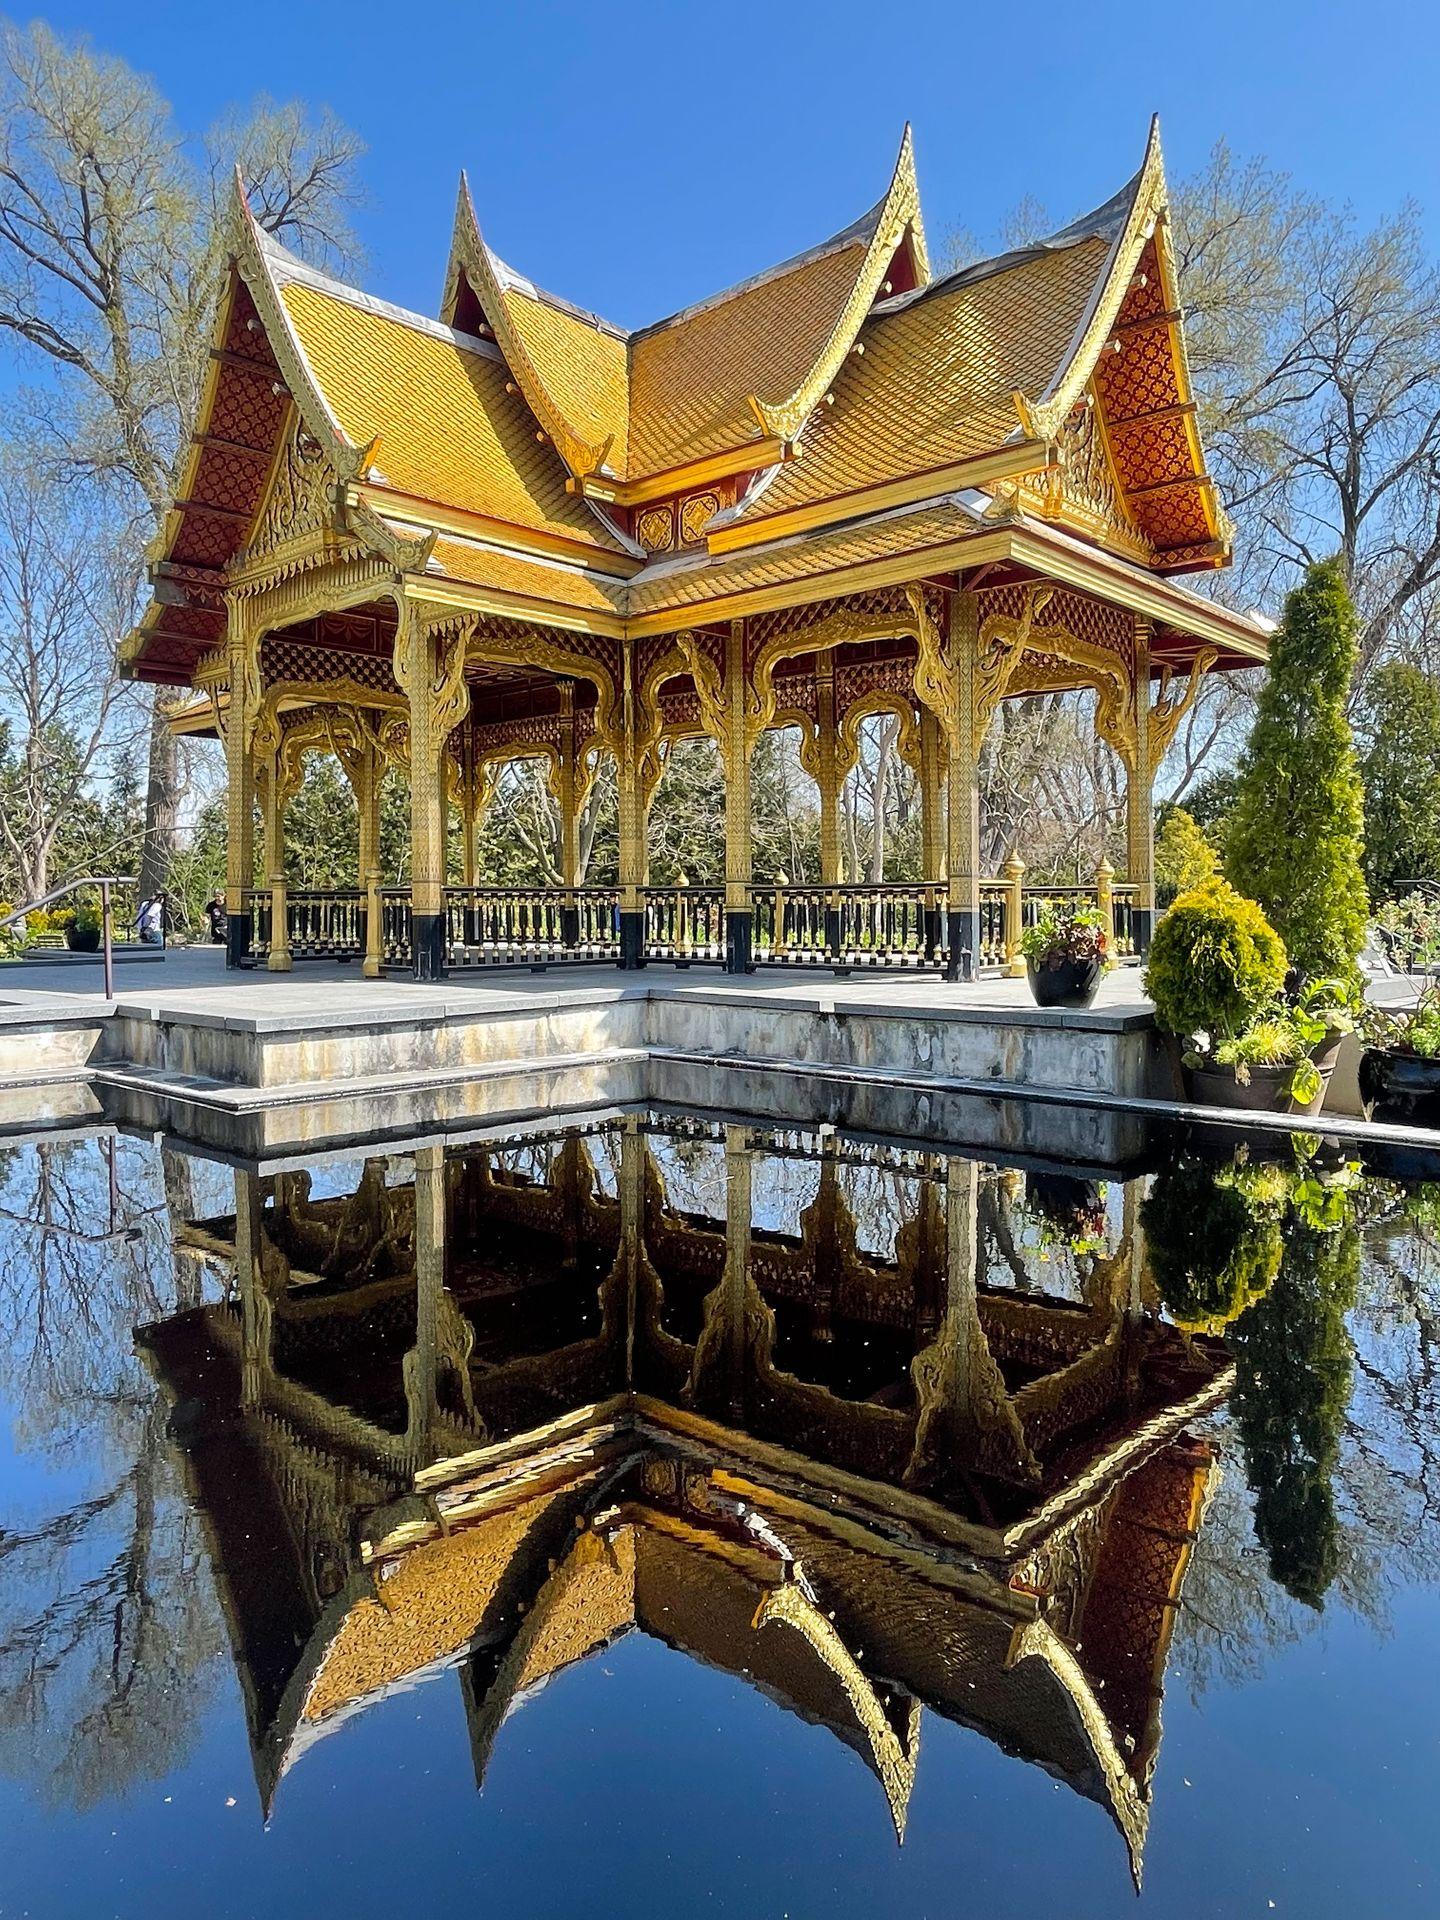 The gold Thai Pavilion in Olbrich Botanical Gardens reflecting in the pool below.